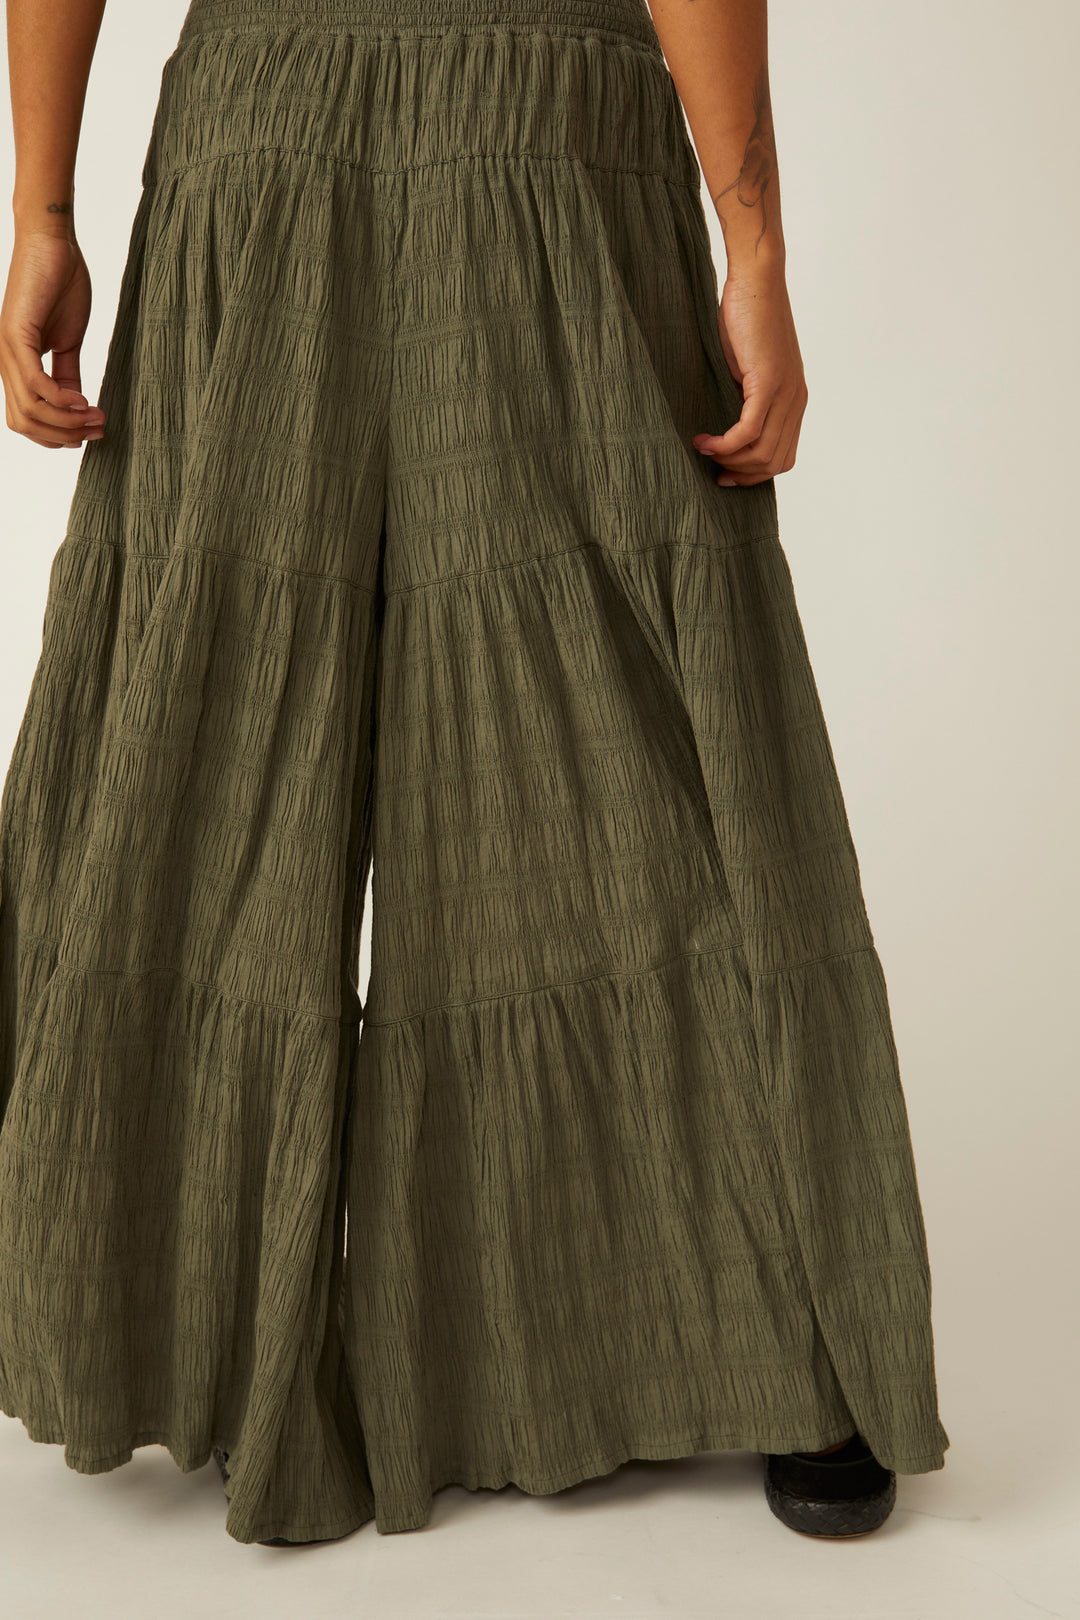 IN PARADISE WIDE LEG PANT-DRIED BASIL - Kingfisher Road - Online Boutique